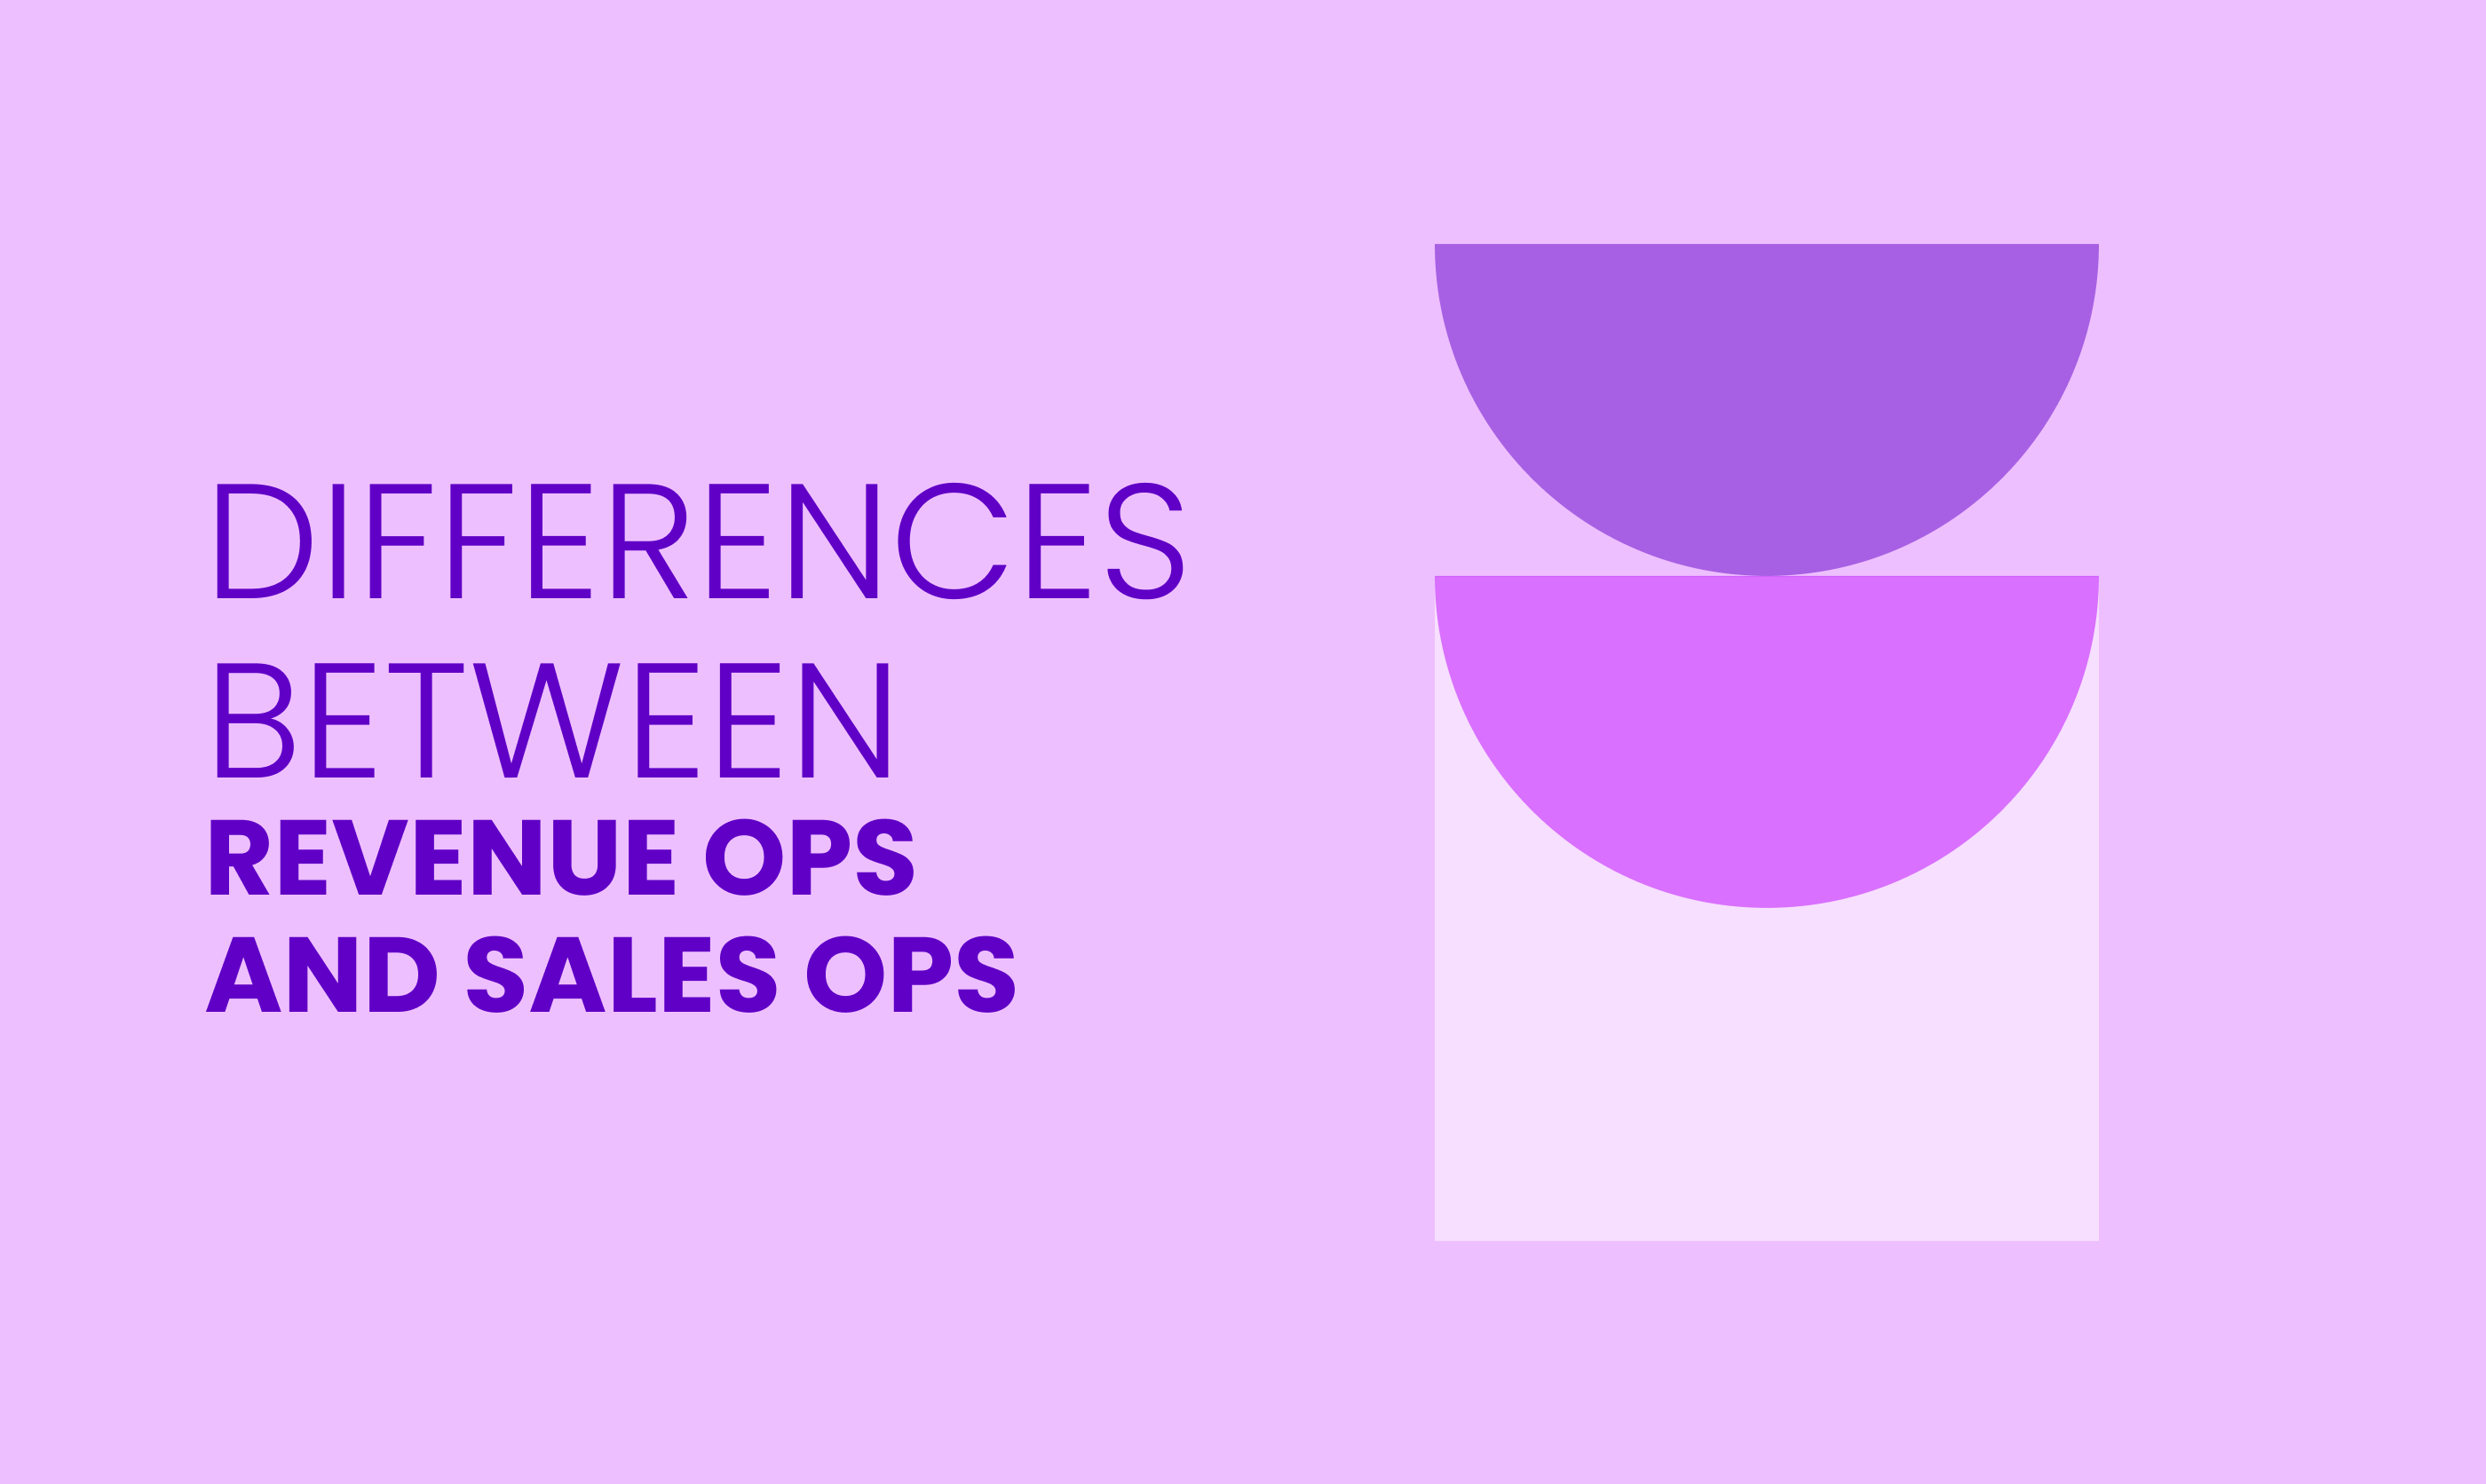 DIFFERENCES BETWEEN REVENUE OPS AND SALES OPS